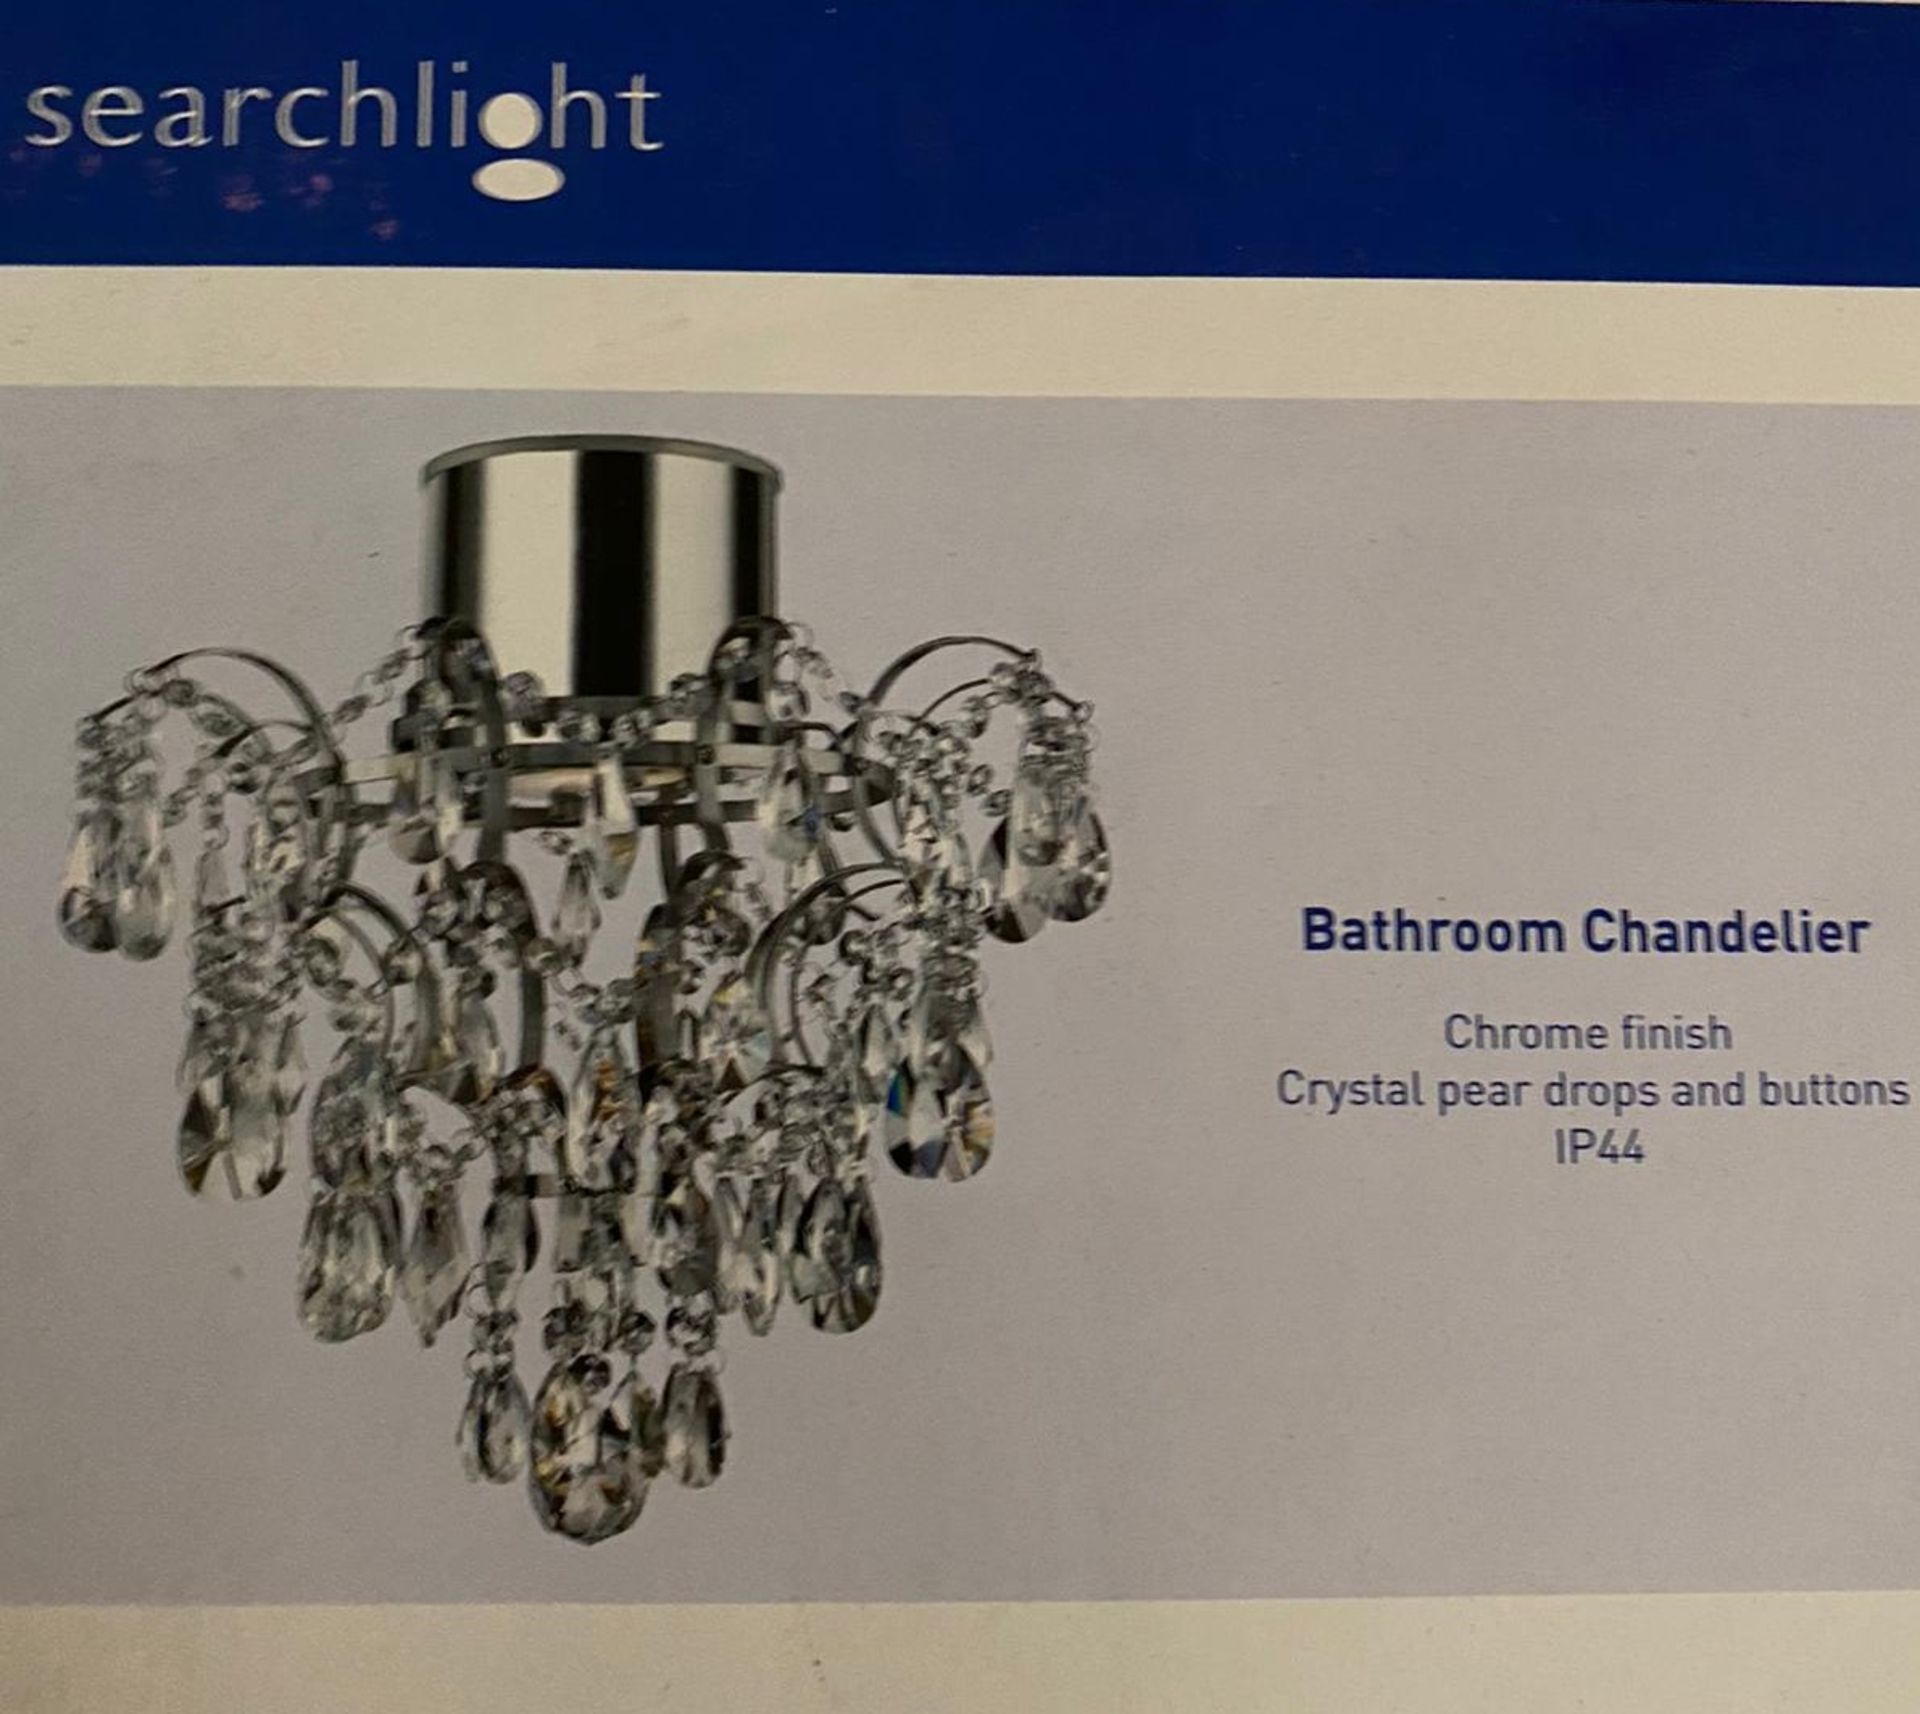 1 x Searchlight Bathroom Chandelier in chrome - Ref: 7901-1CC - New and Boxed - RRP: £200.00 - Image 5 of 5